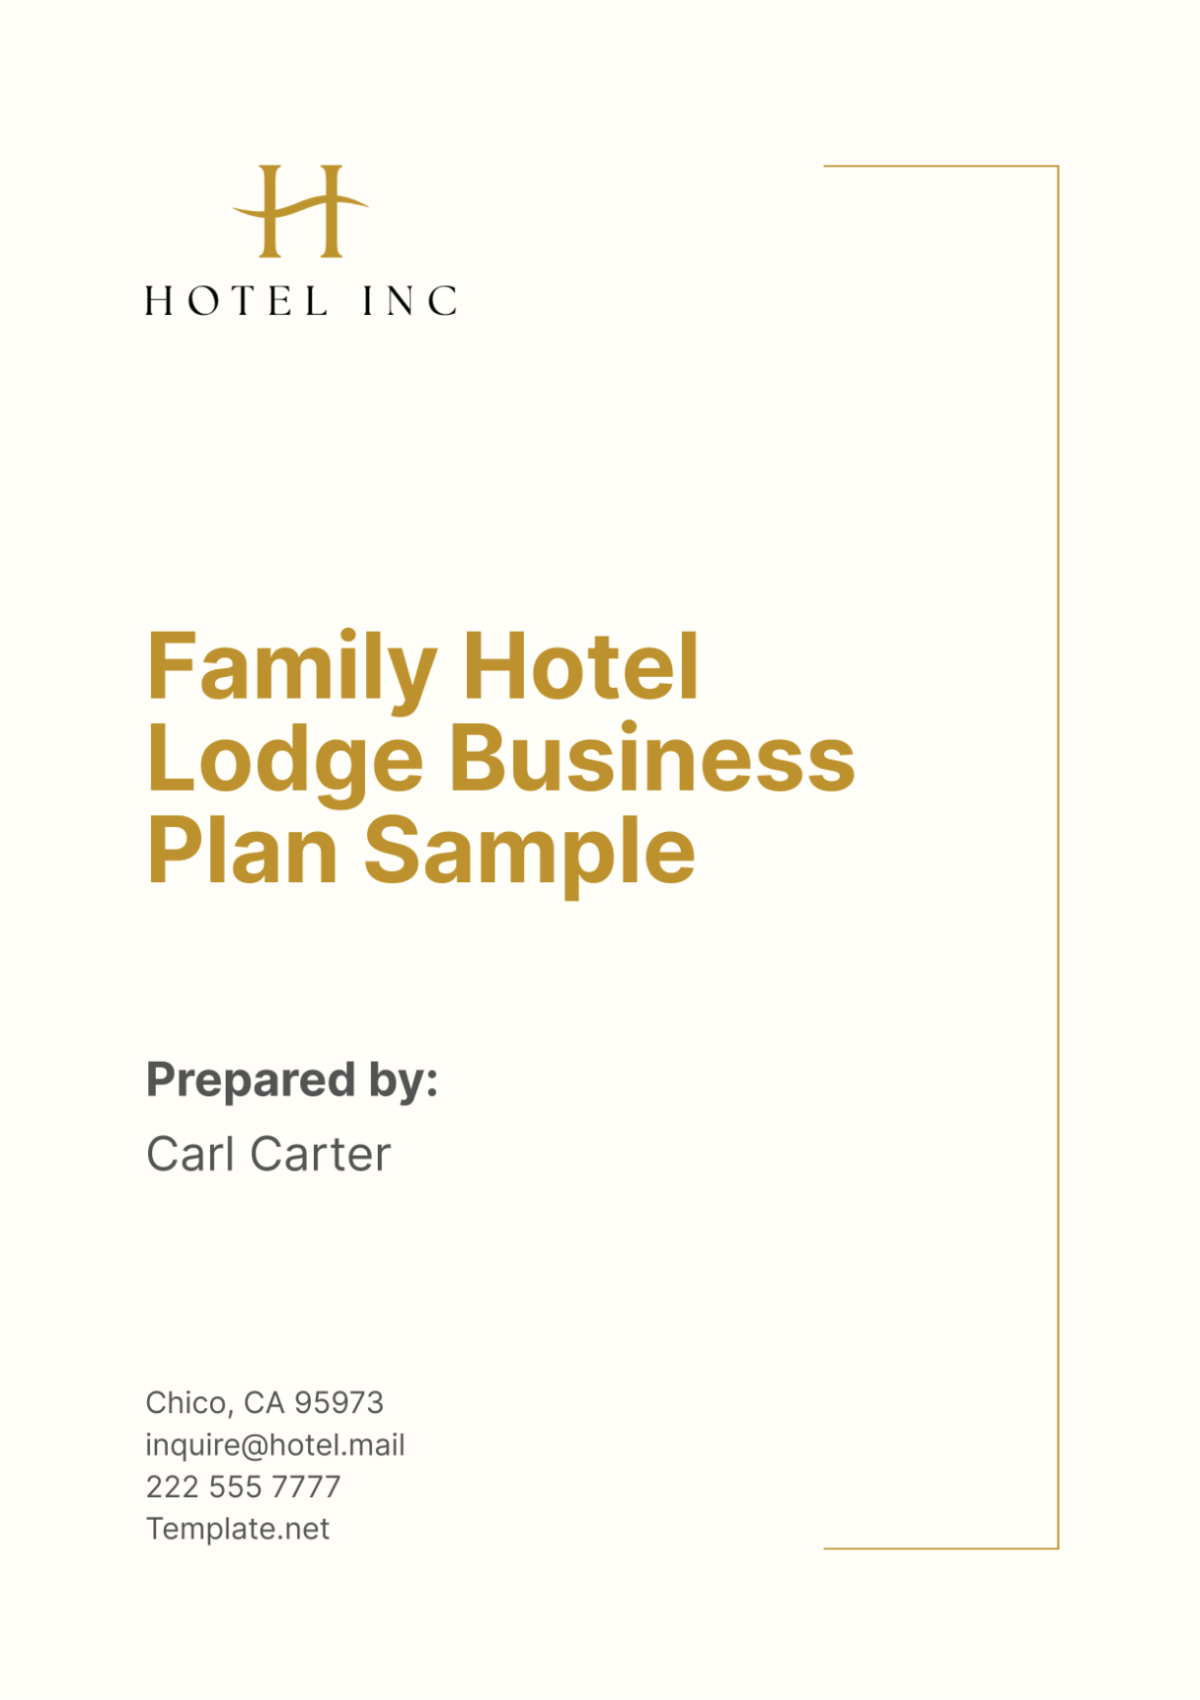 Free Family Hotel Lodge Business Plan Sample Template